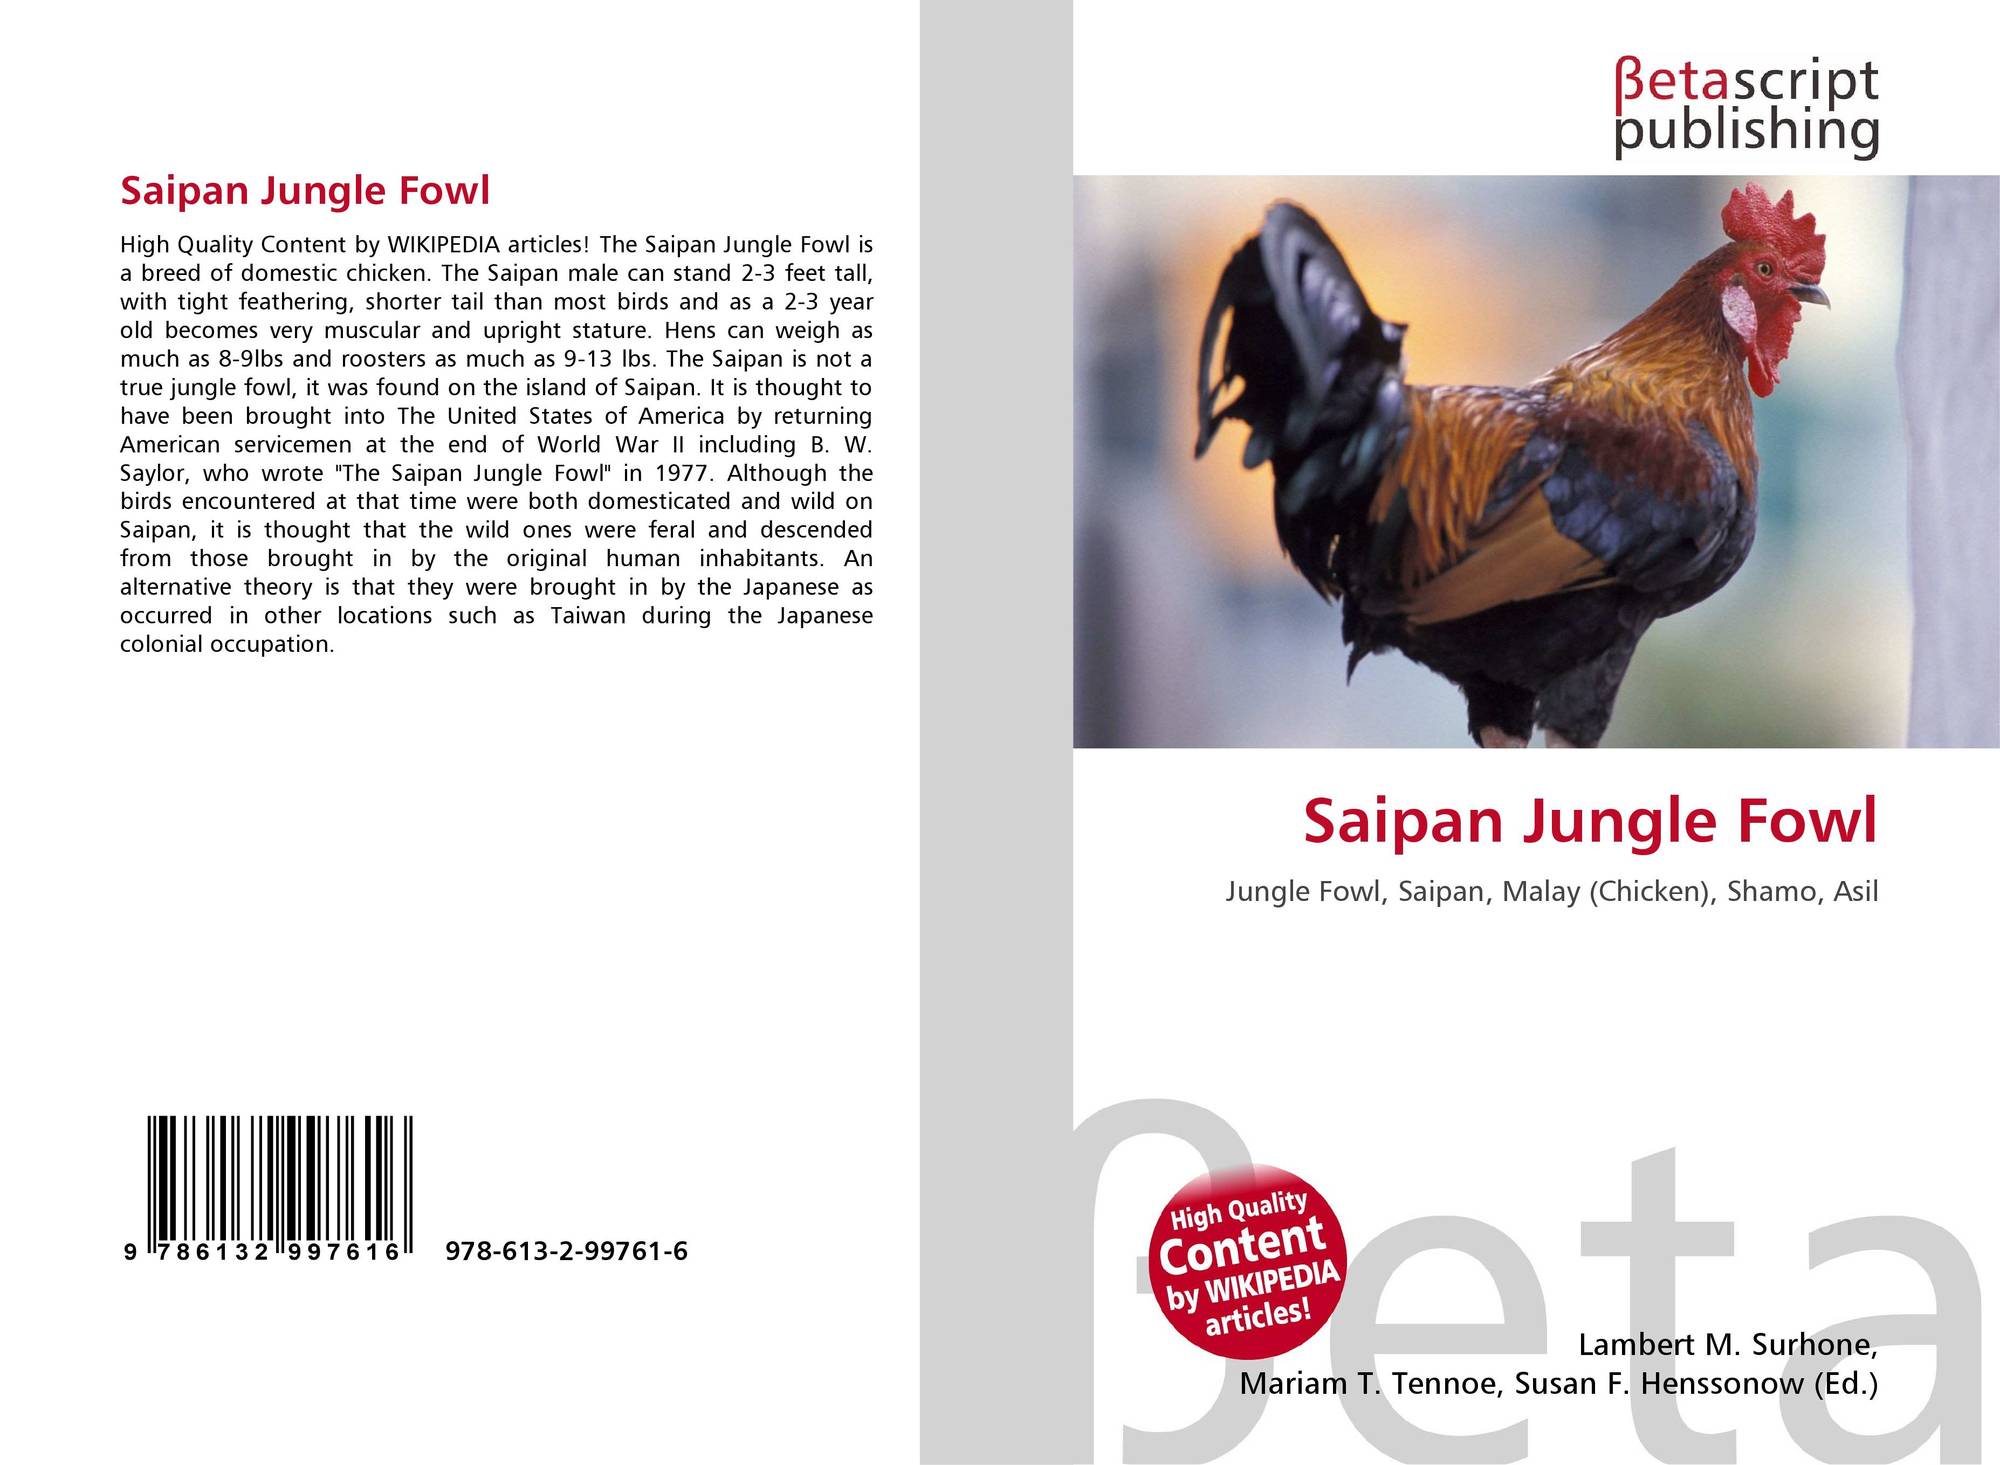 To the book Saipan Jungle Fowl with isbn 978-613-2-99761-6. 